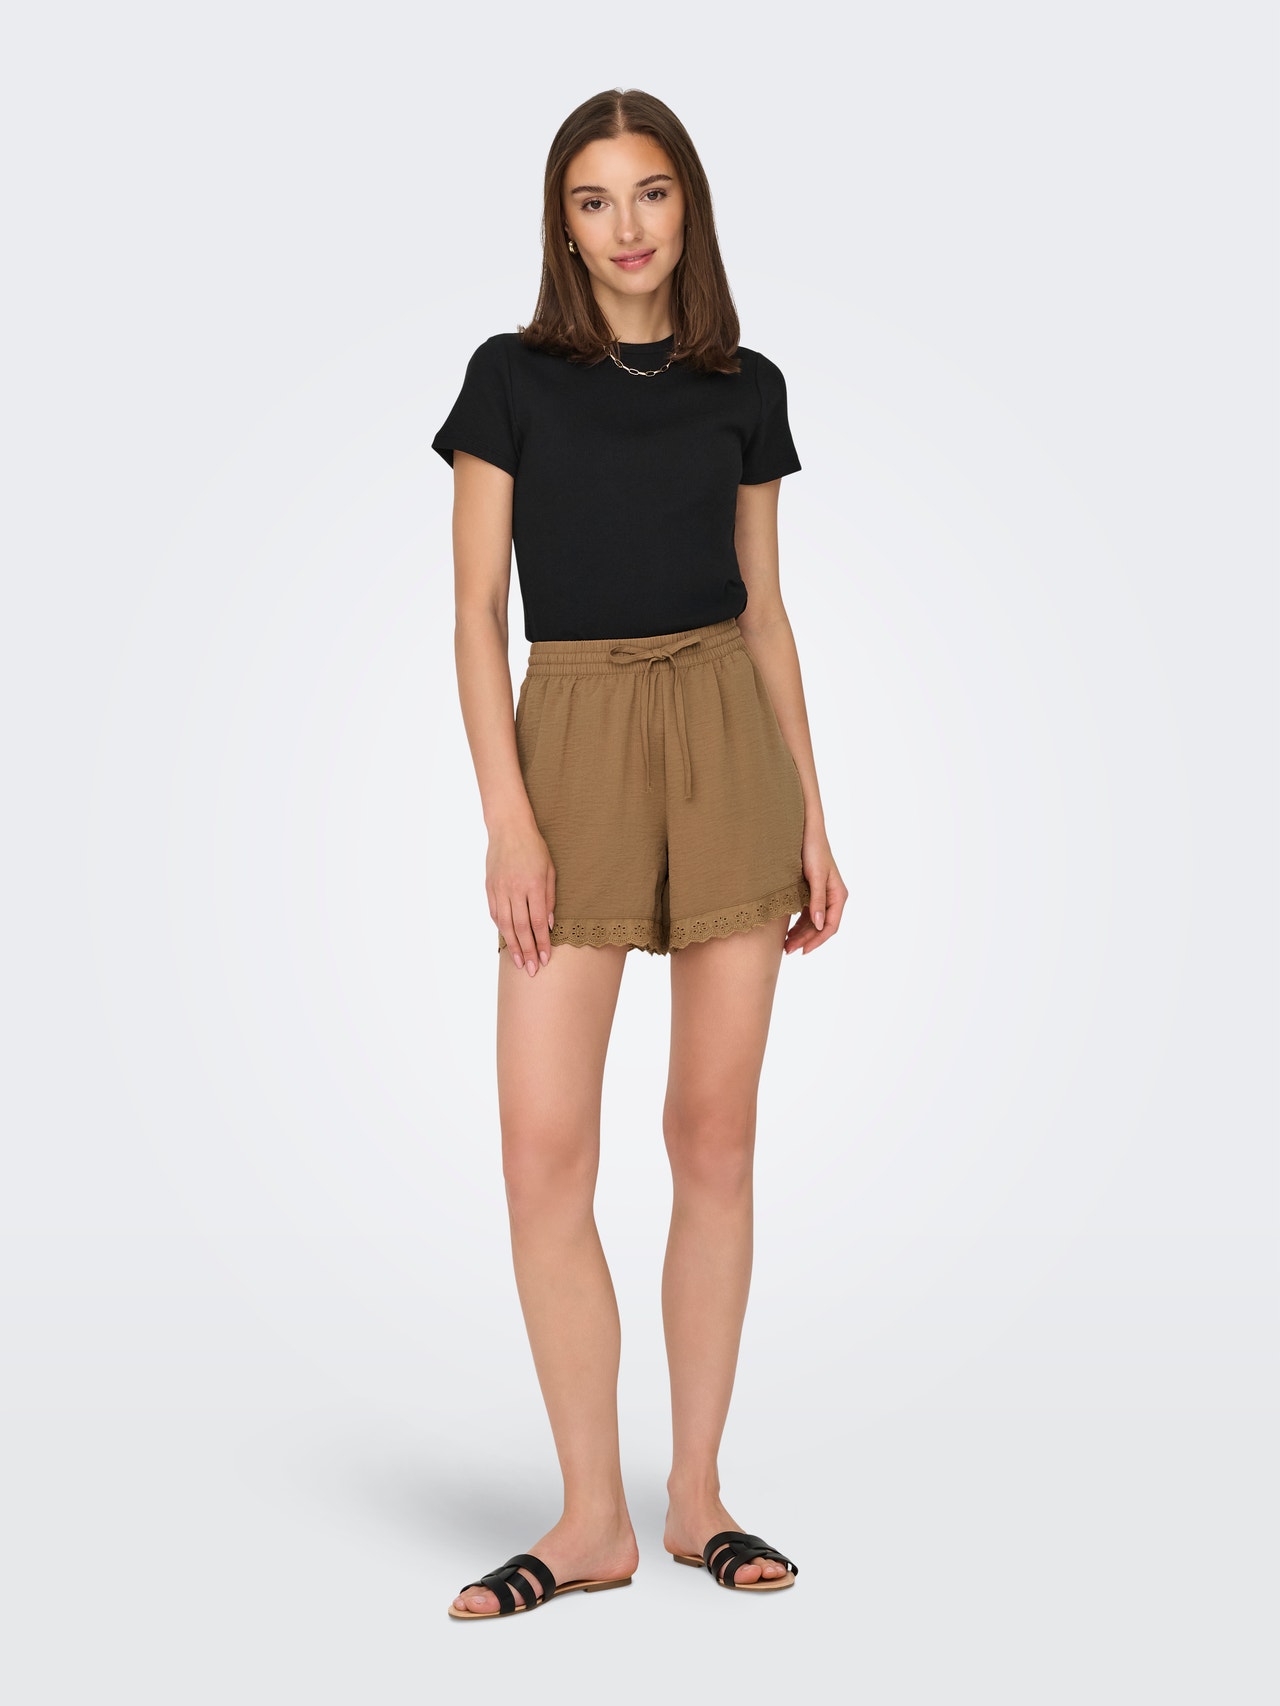 ONLY Shorts With Lace Edge -Toasted Coconut - 15295675